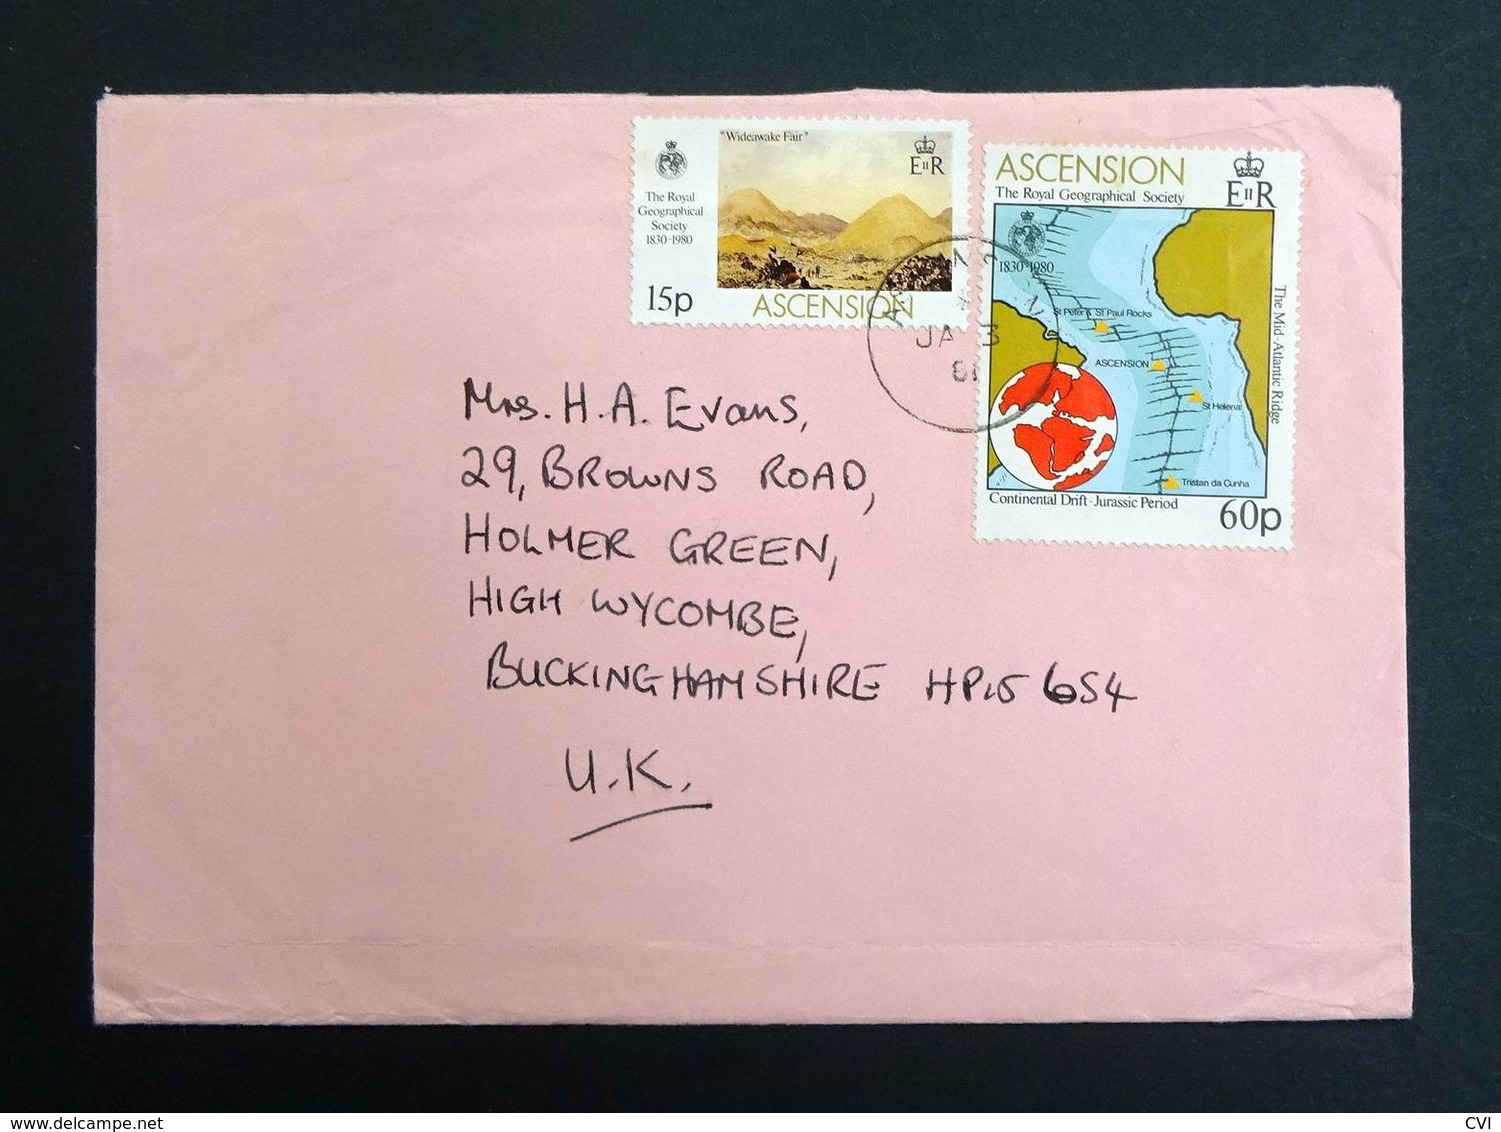 Ascension Islands 1980 Yt.270/SG275 & Yt.271/SG276 To High Wycombe, UK Cover. - Ascension